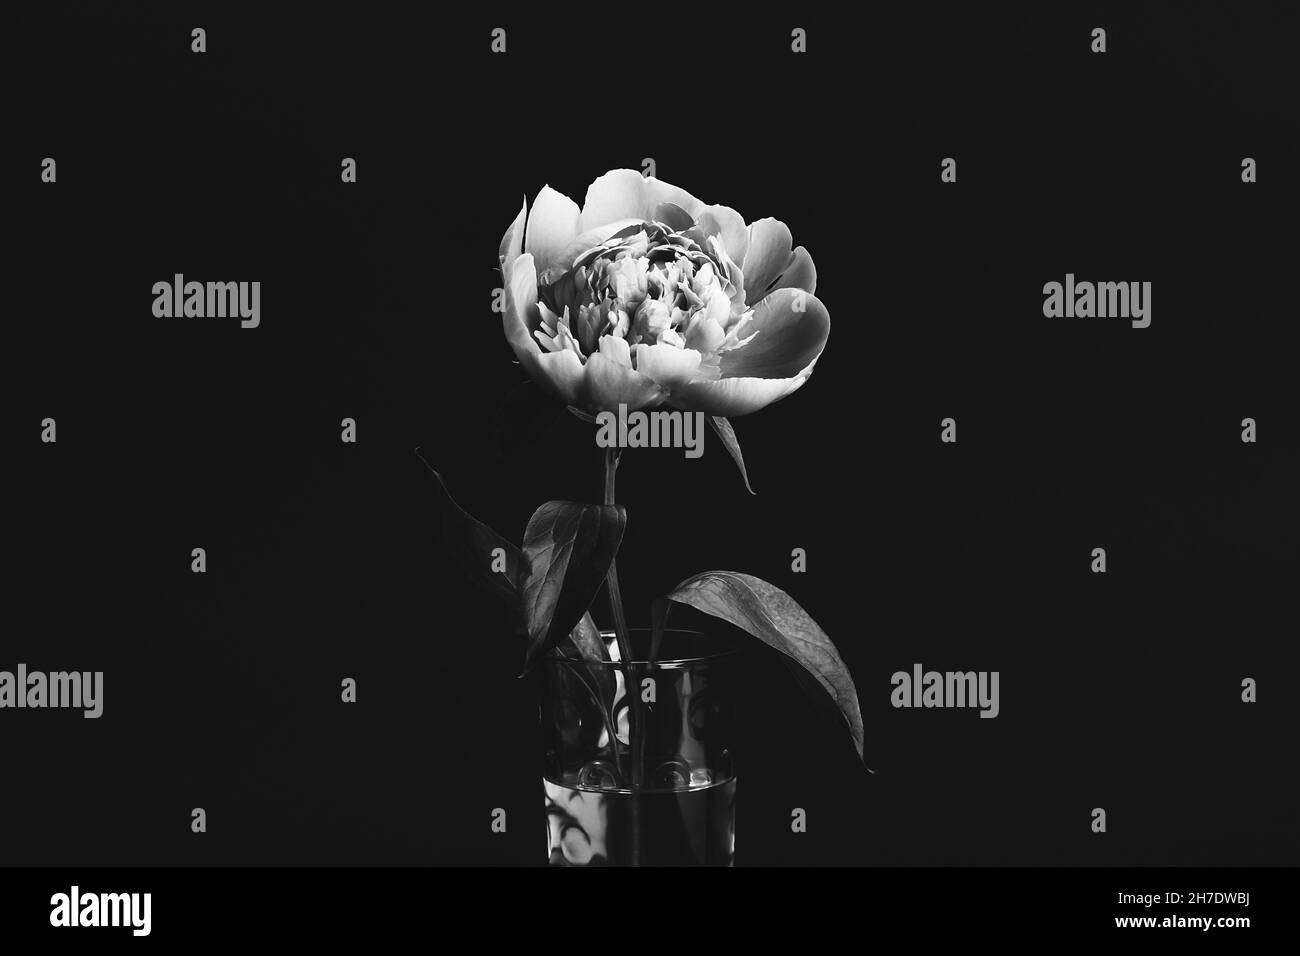 Peony in glass vase on black background. Black and white photo. Floral card, poster design Stock Photo